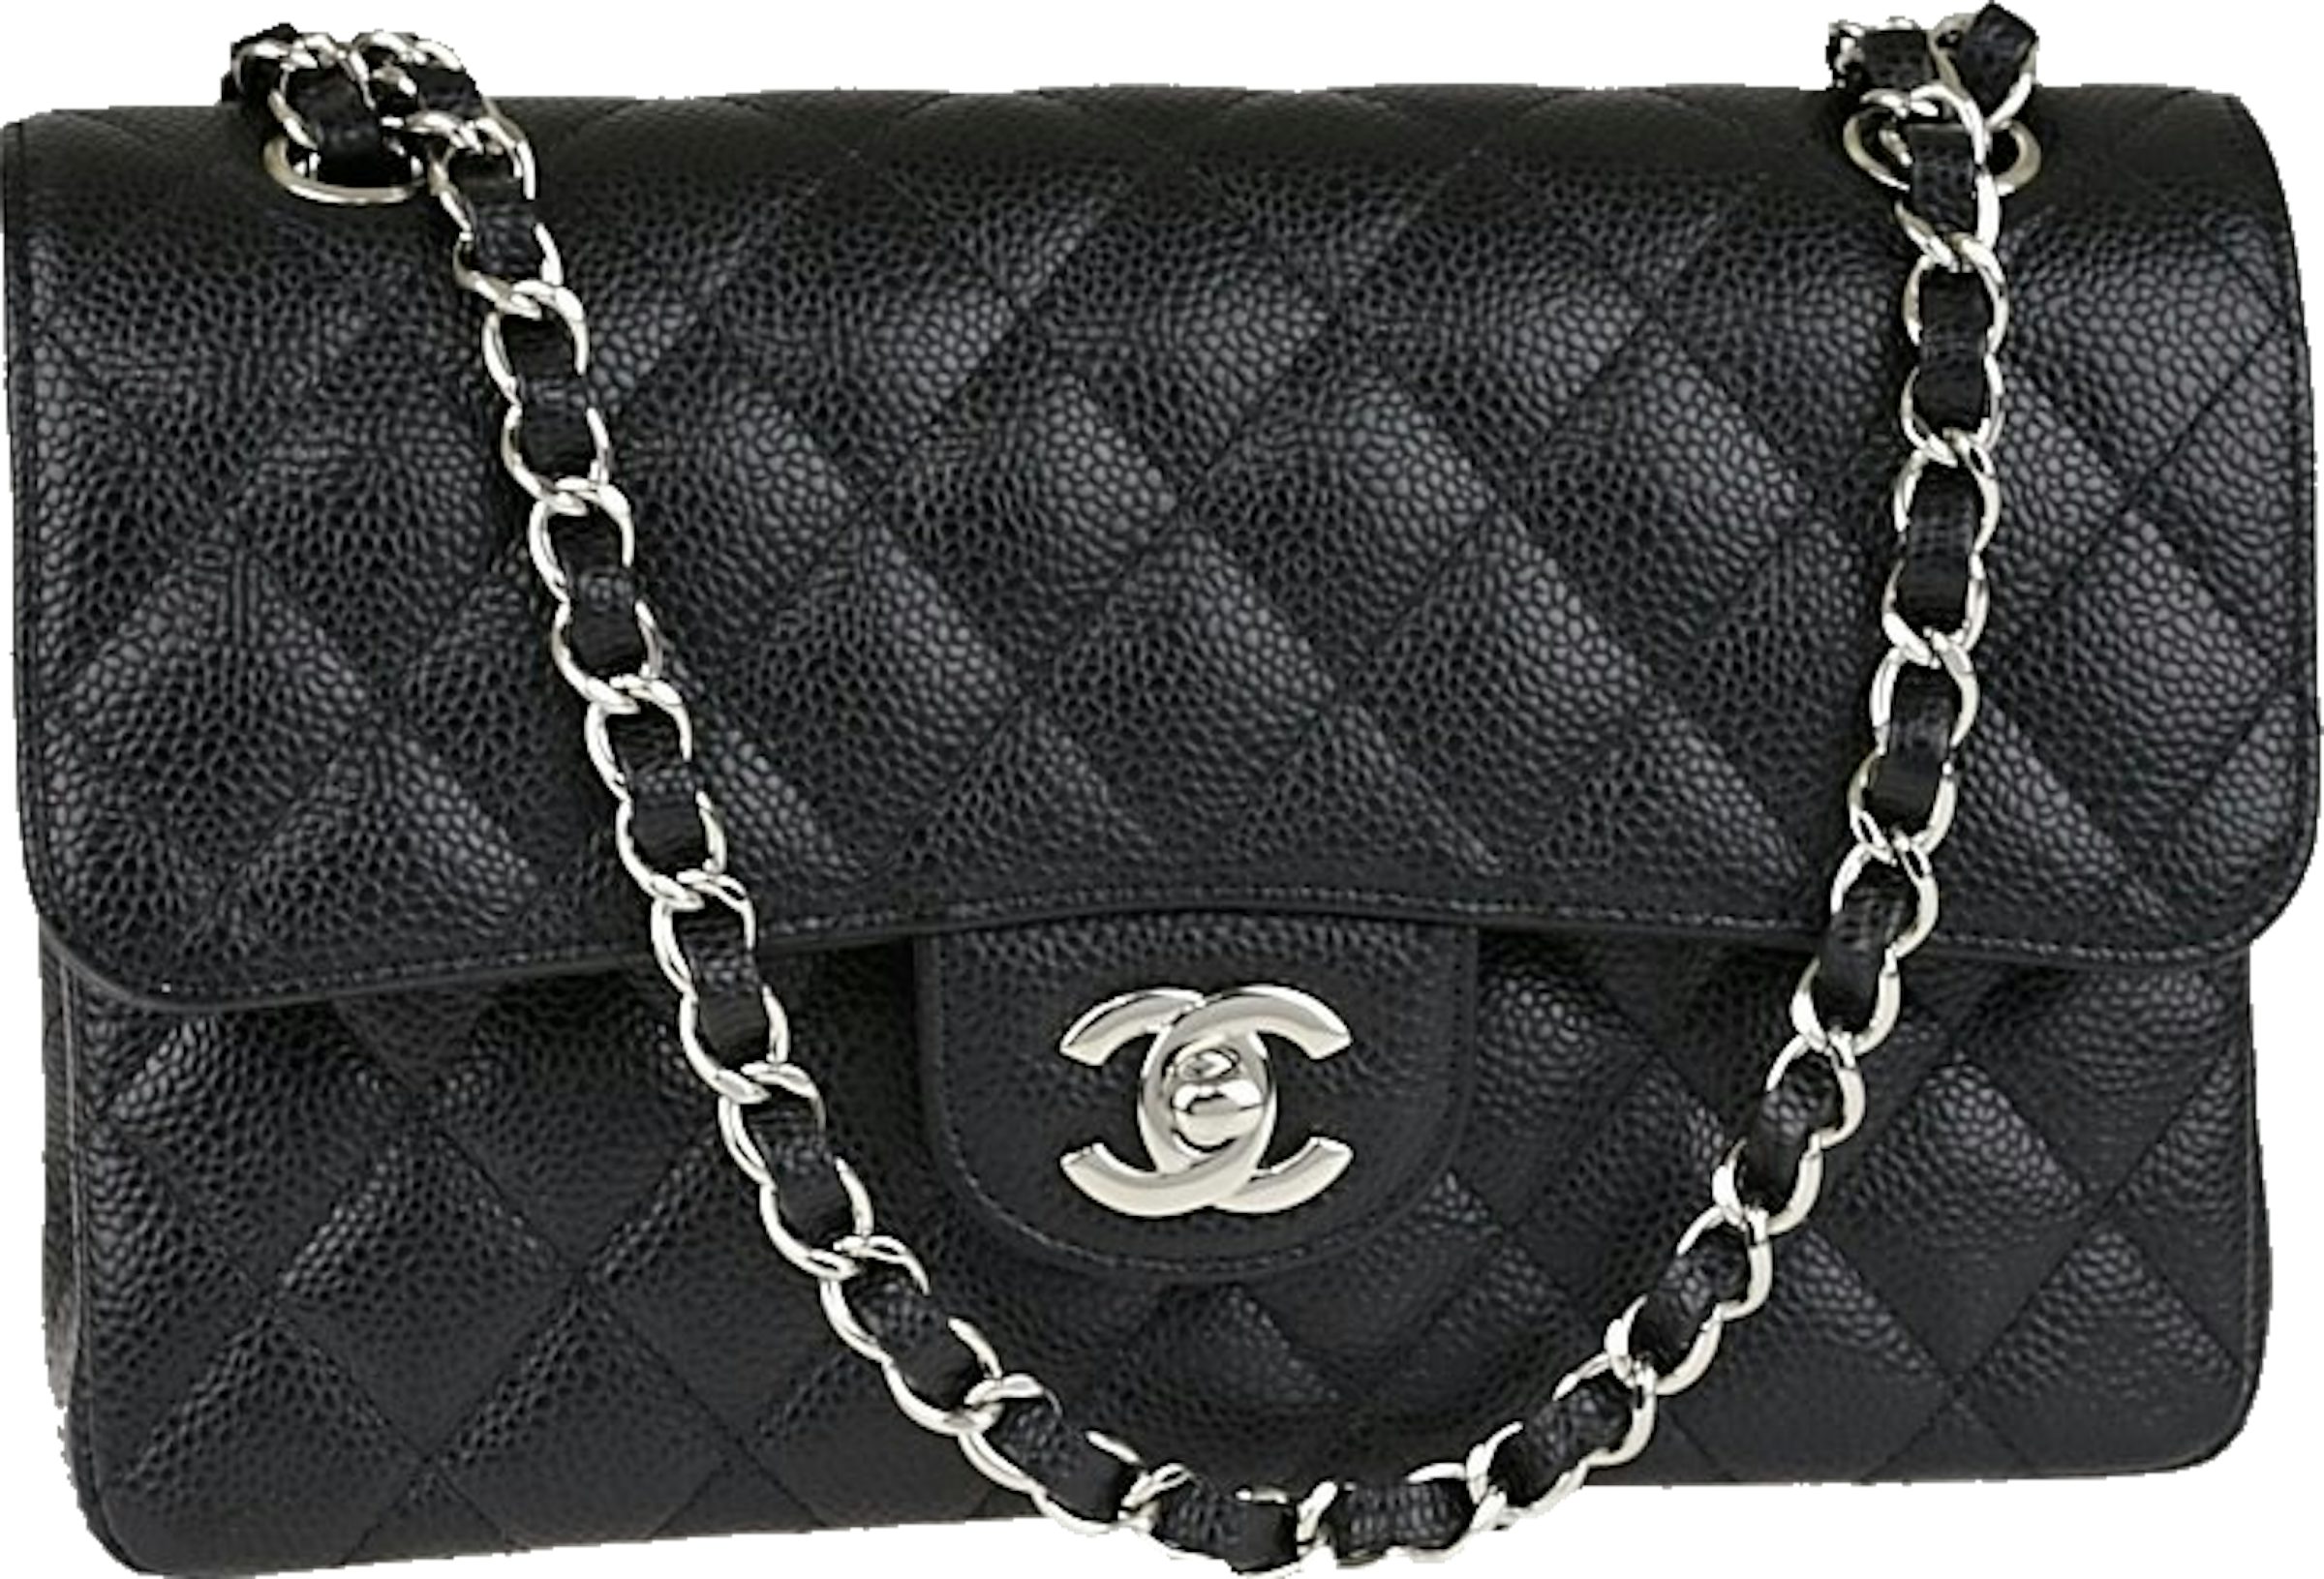 Chanel Small Classic Flap Bag  Chanel small classic, Classic flap